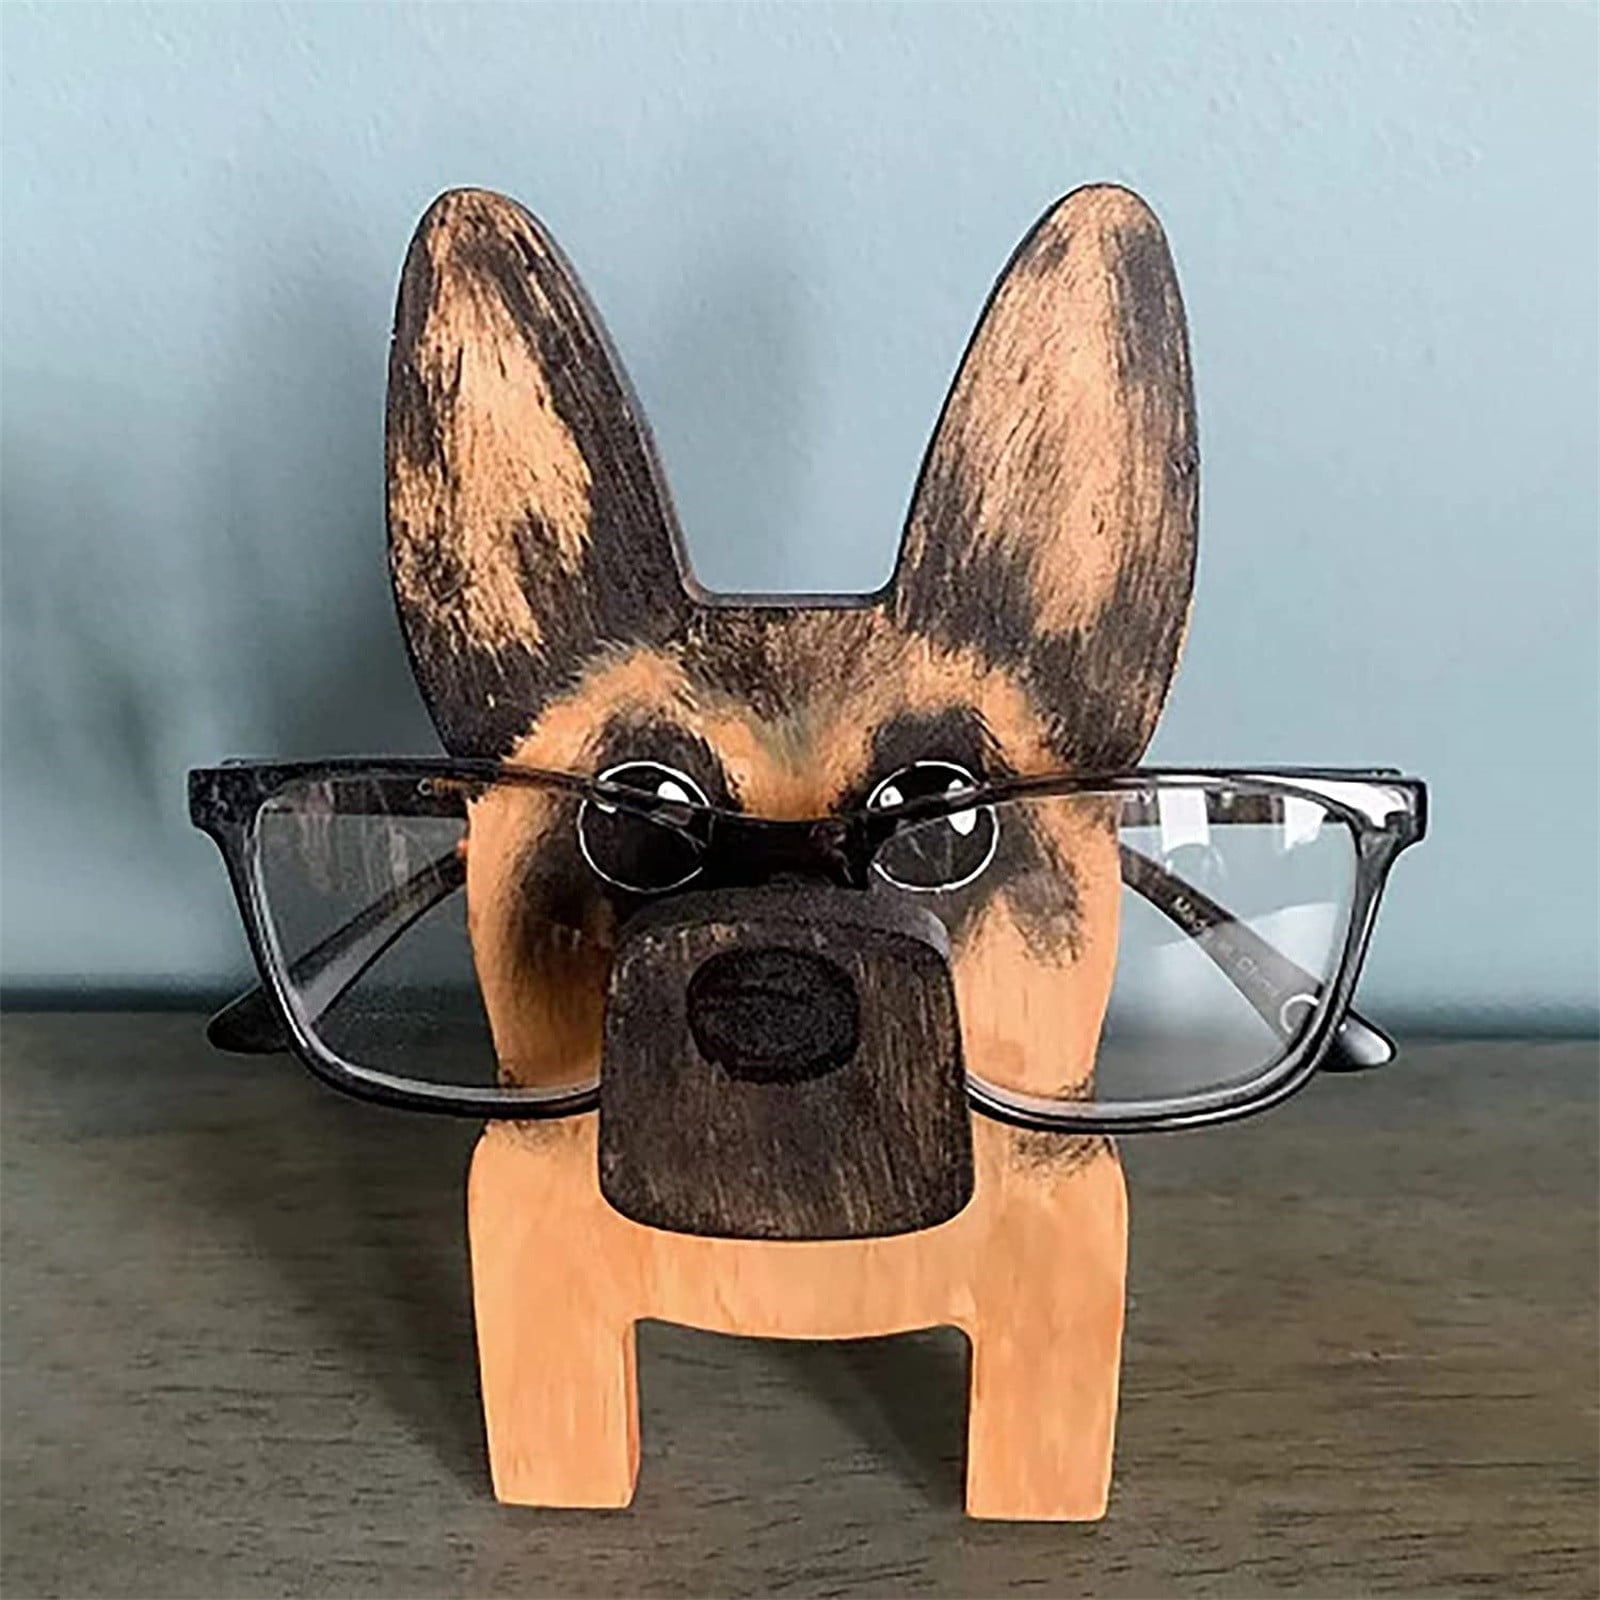 YGAOR Glasses Holder Stand Animal Wooden Eyeglass Holder Stand Cute Animal  Pet Glasses Stand Holder Cat Handmade Wood Animal Shape Eye Glass Holder